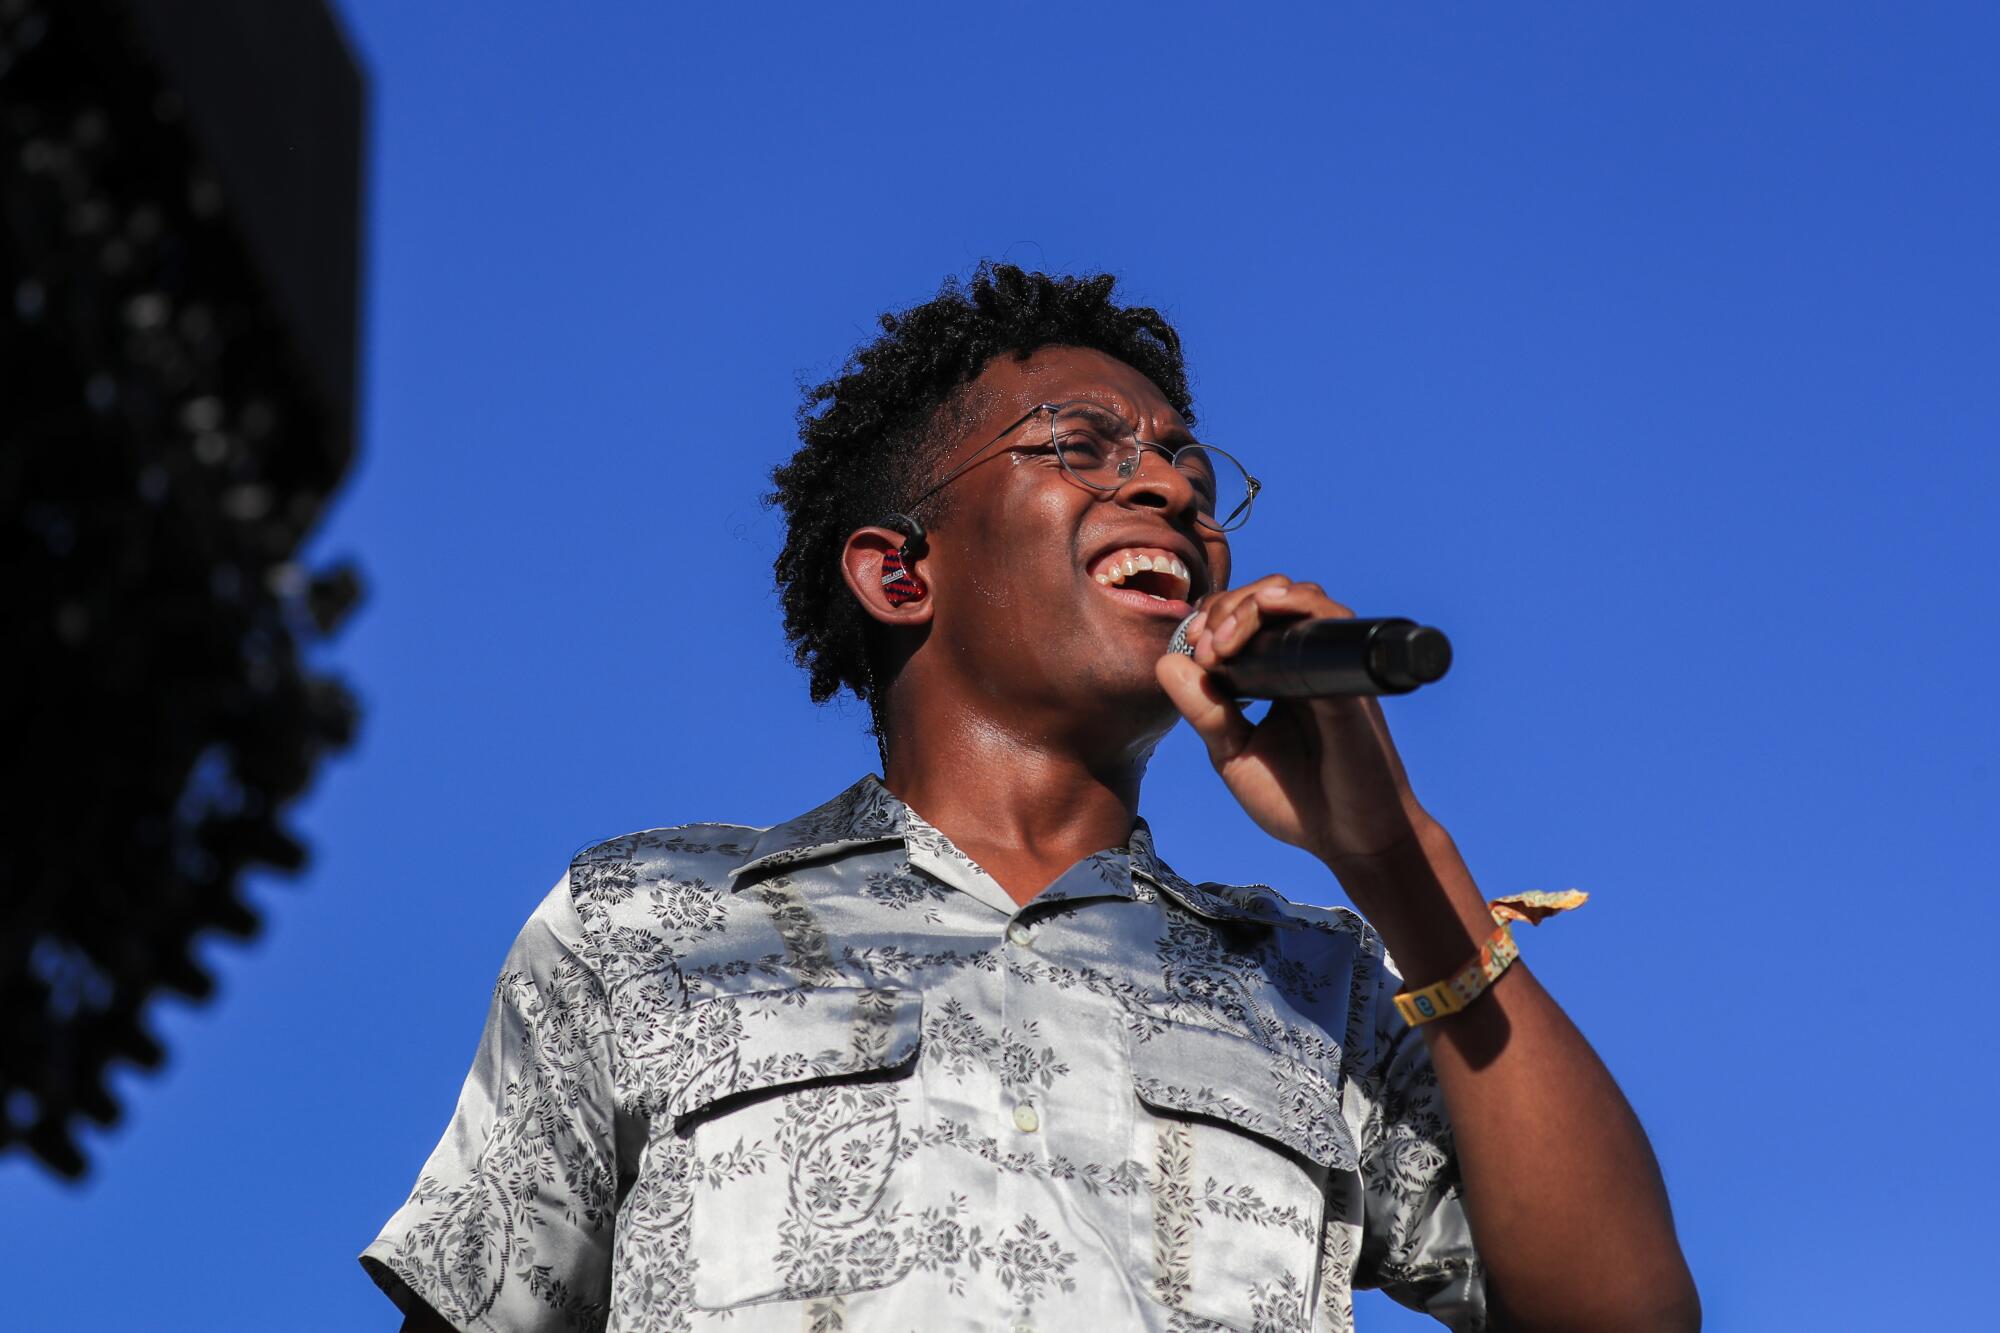 Breland performs on the Mane Stage on the first day of Stagecoach 2023.